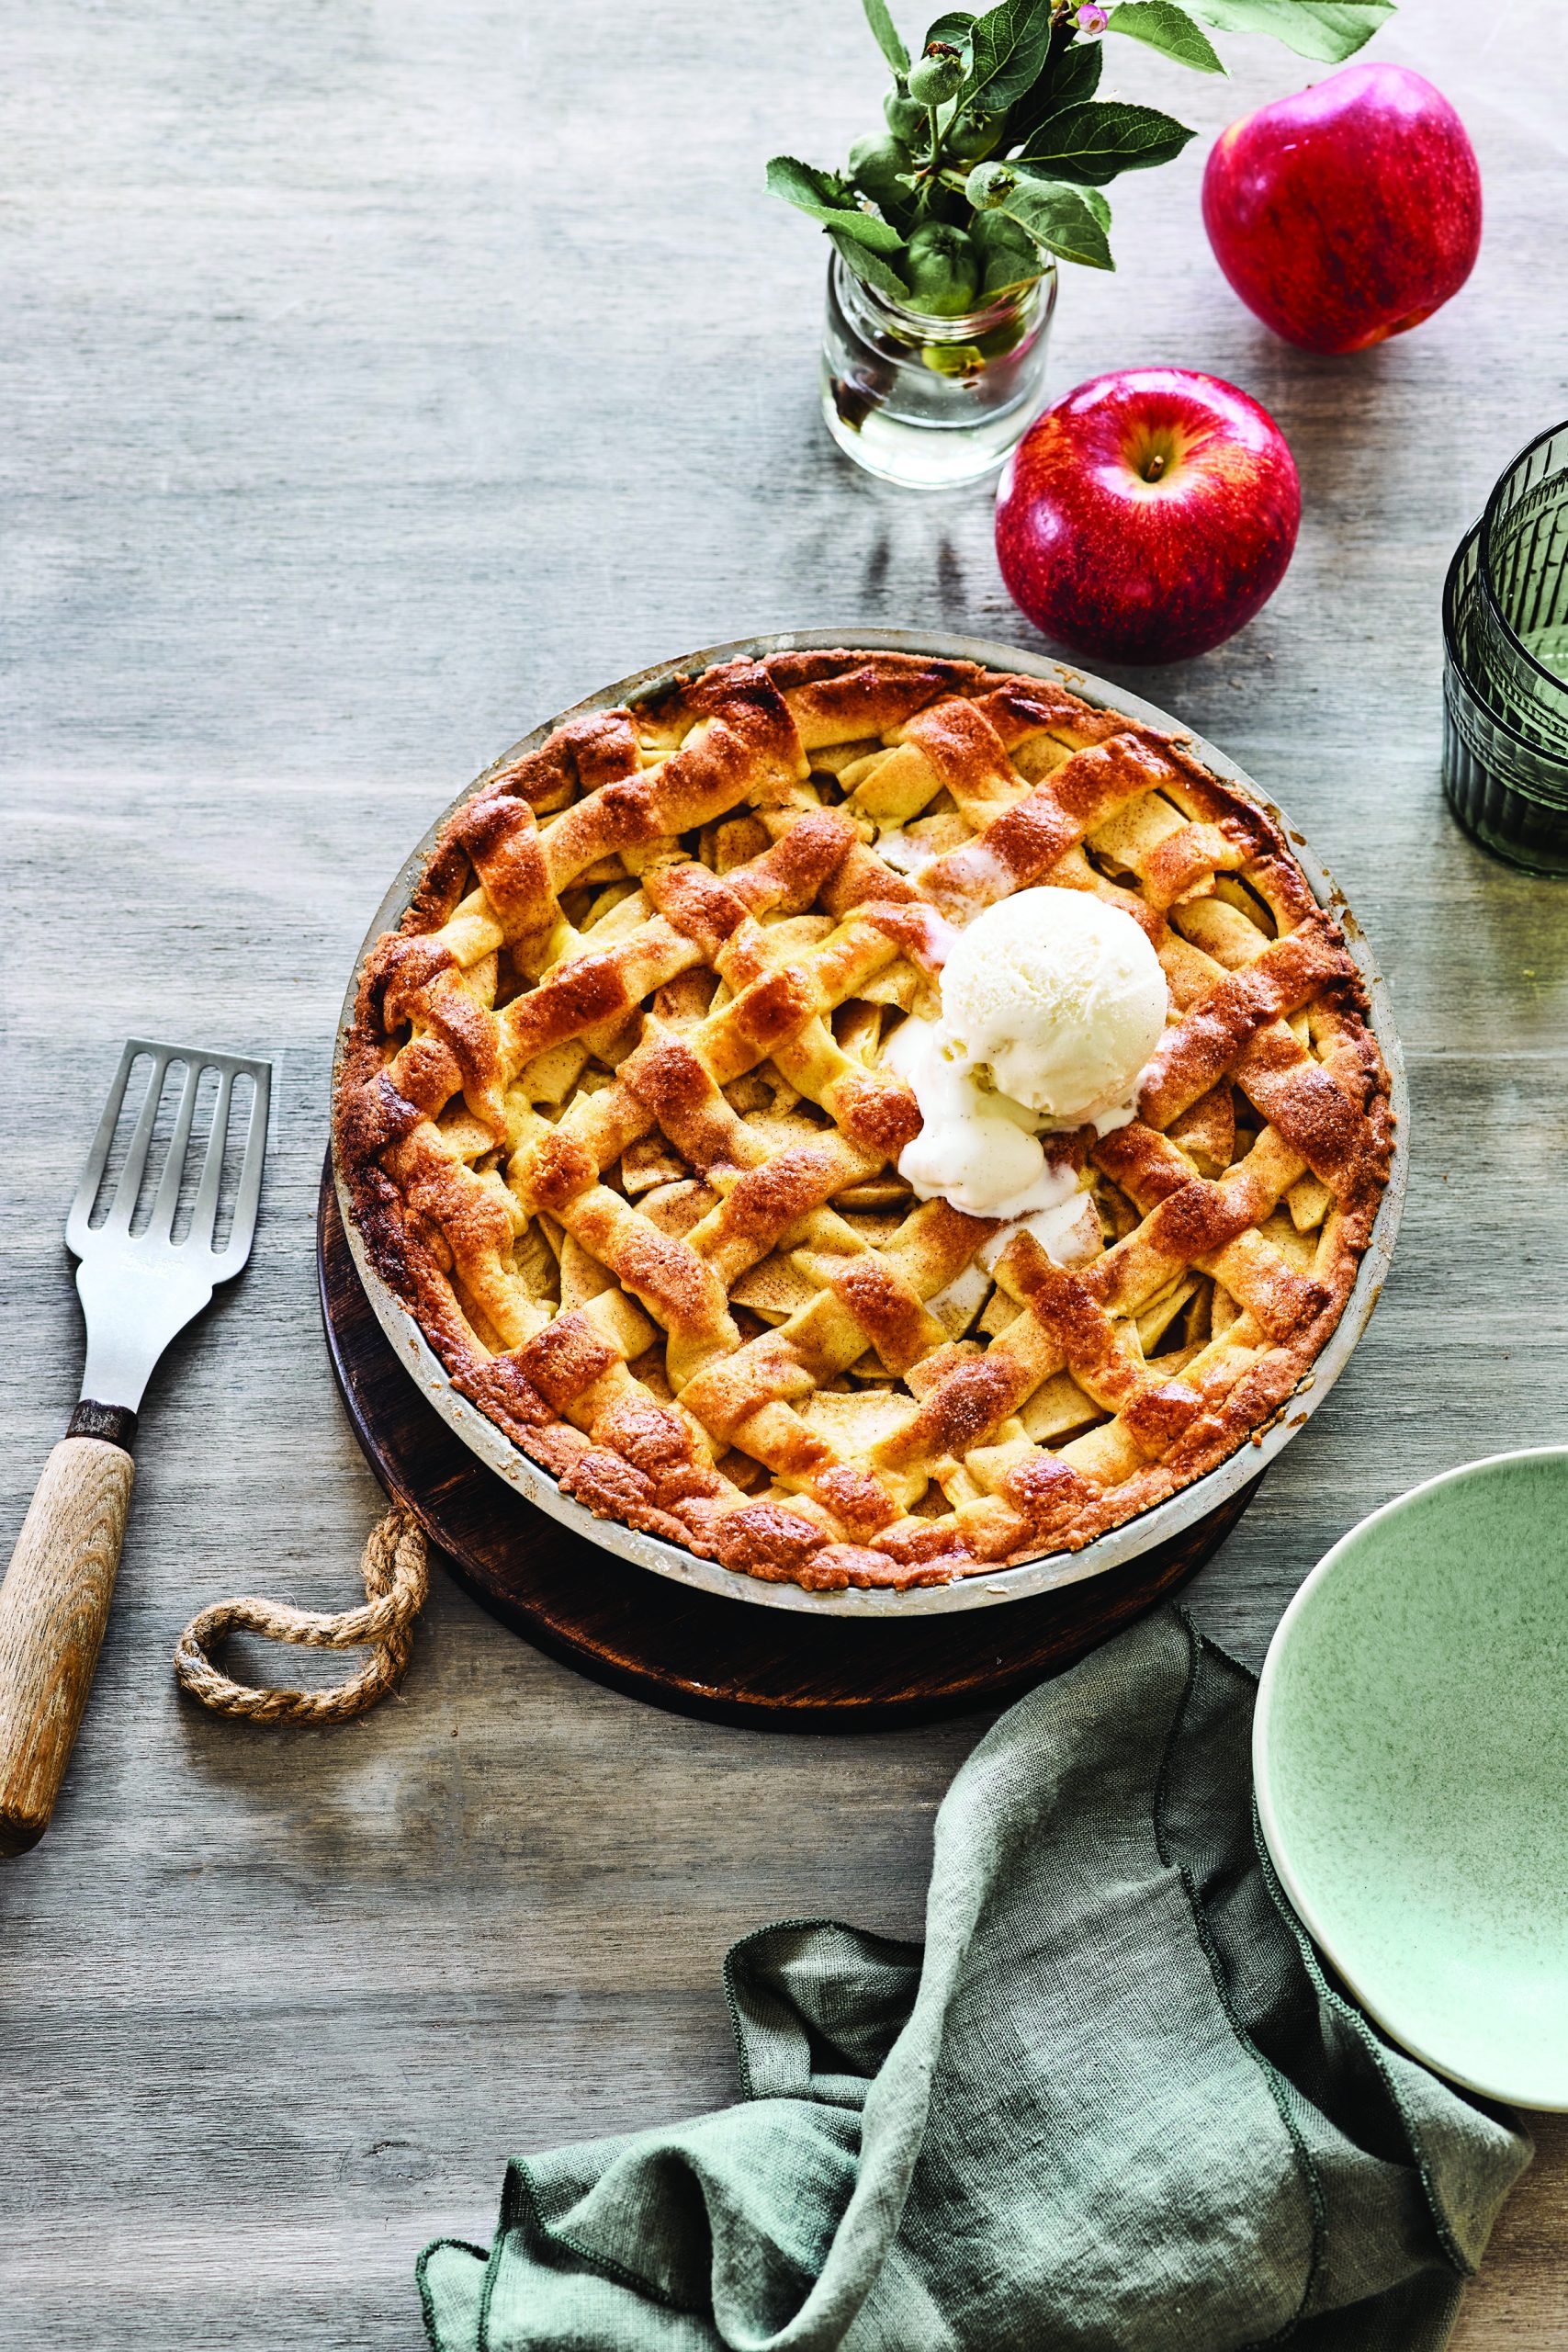 Classic Apple Tart. (Photo courtesy of Family Features.)